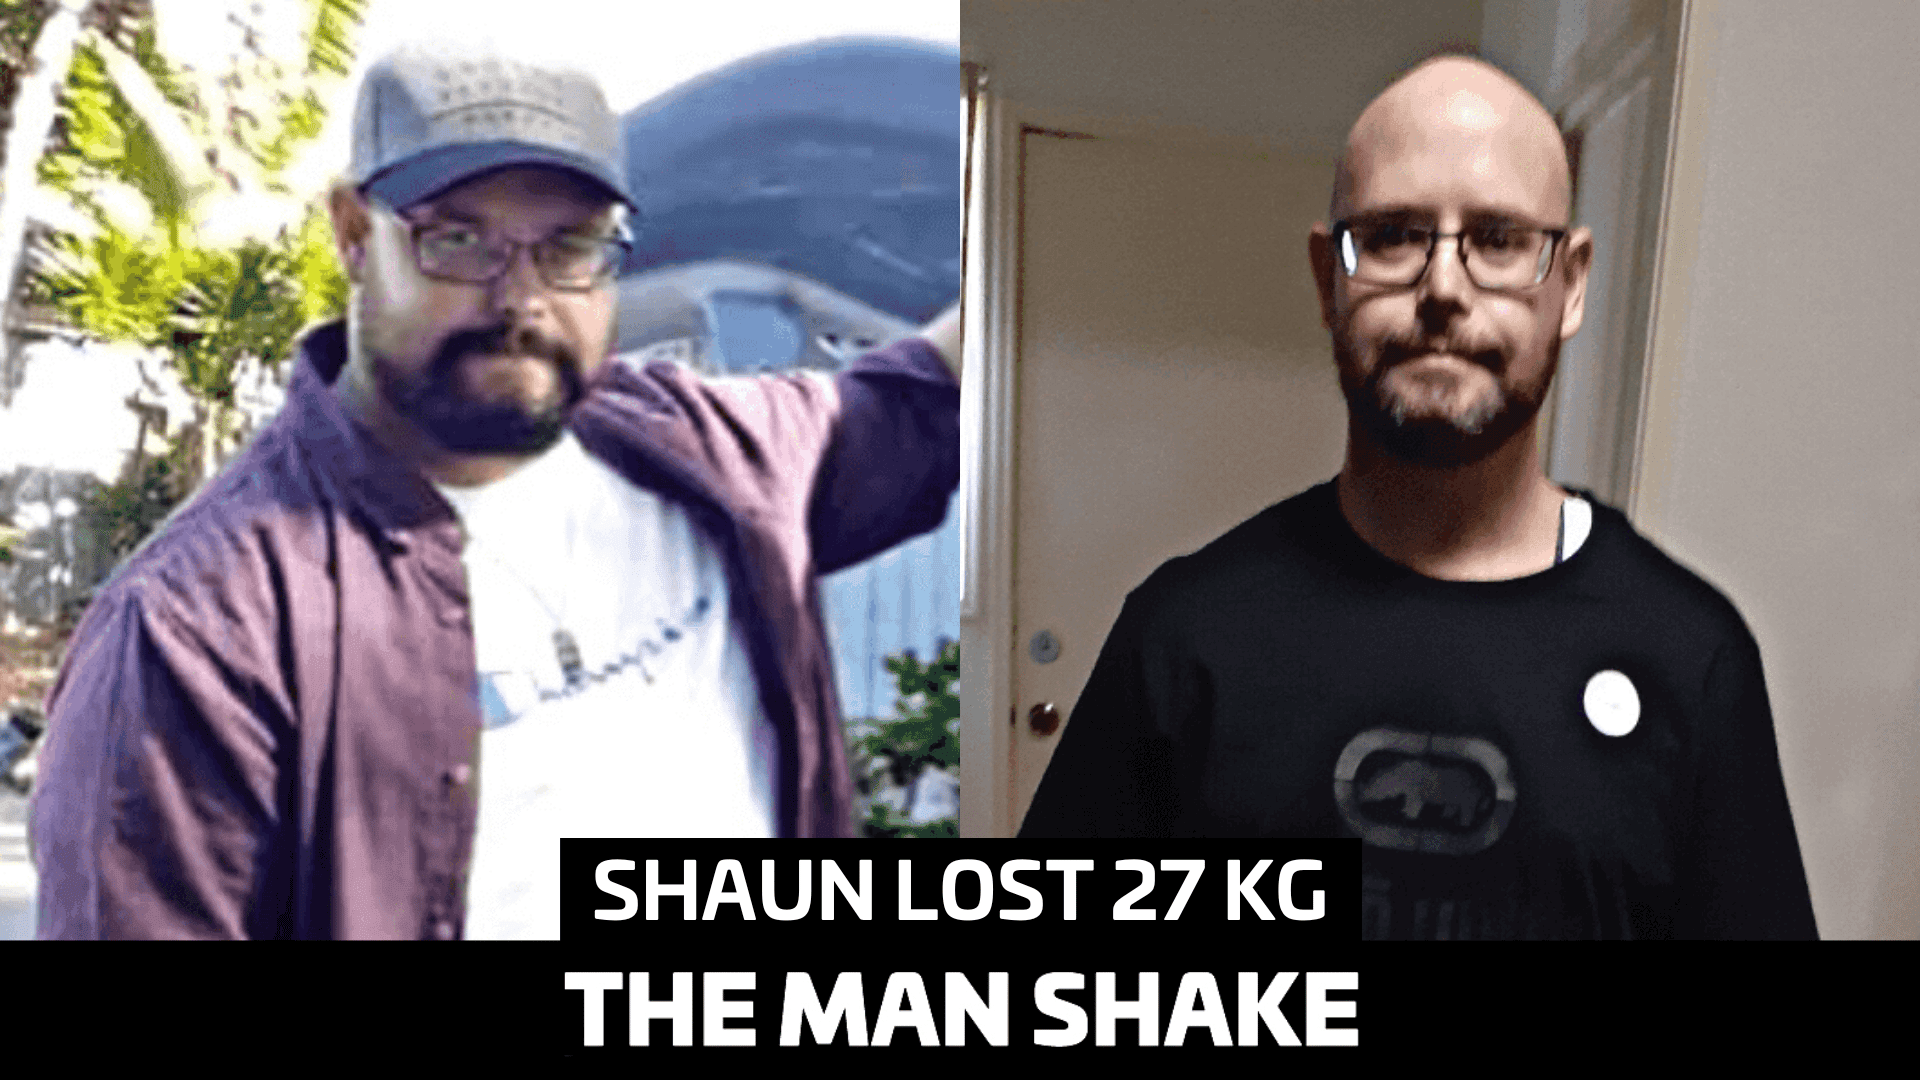 Shaun dropped 27kg in 7 months.